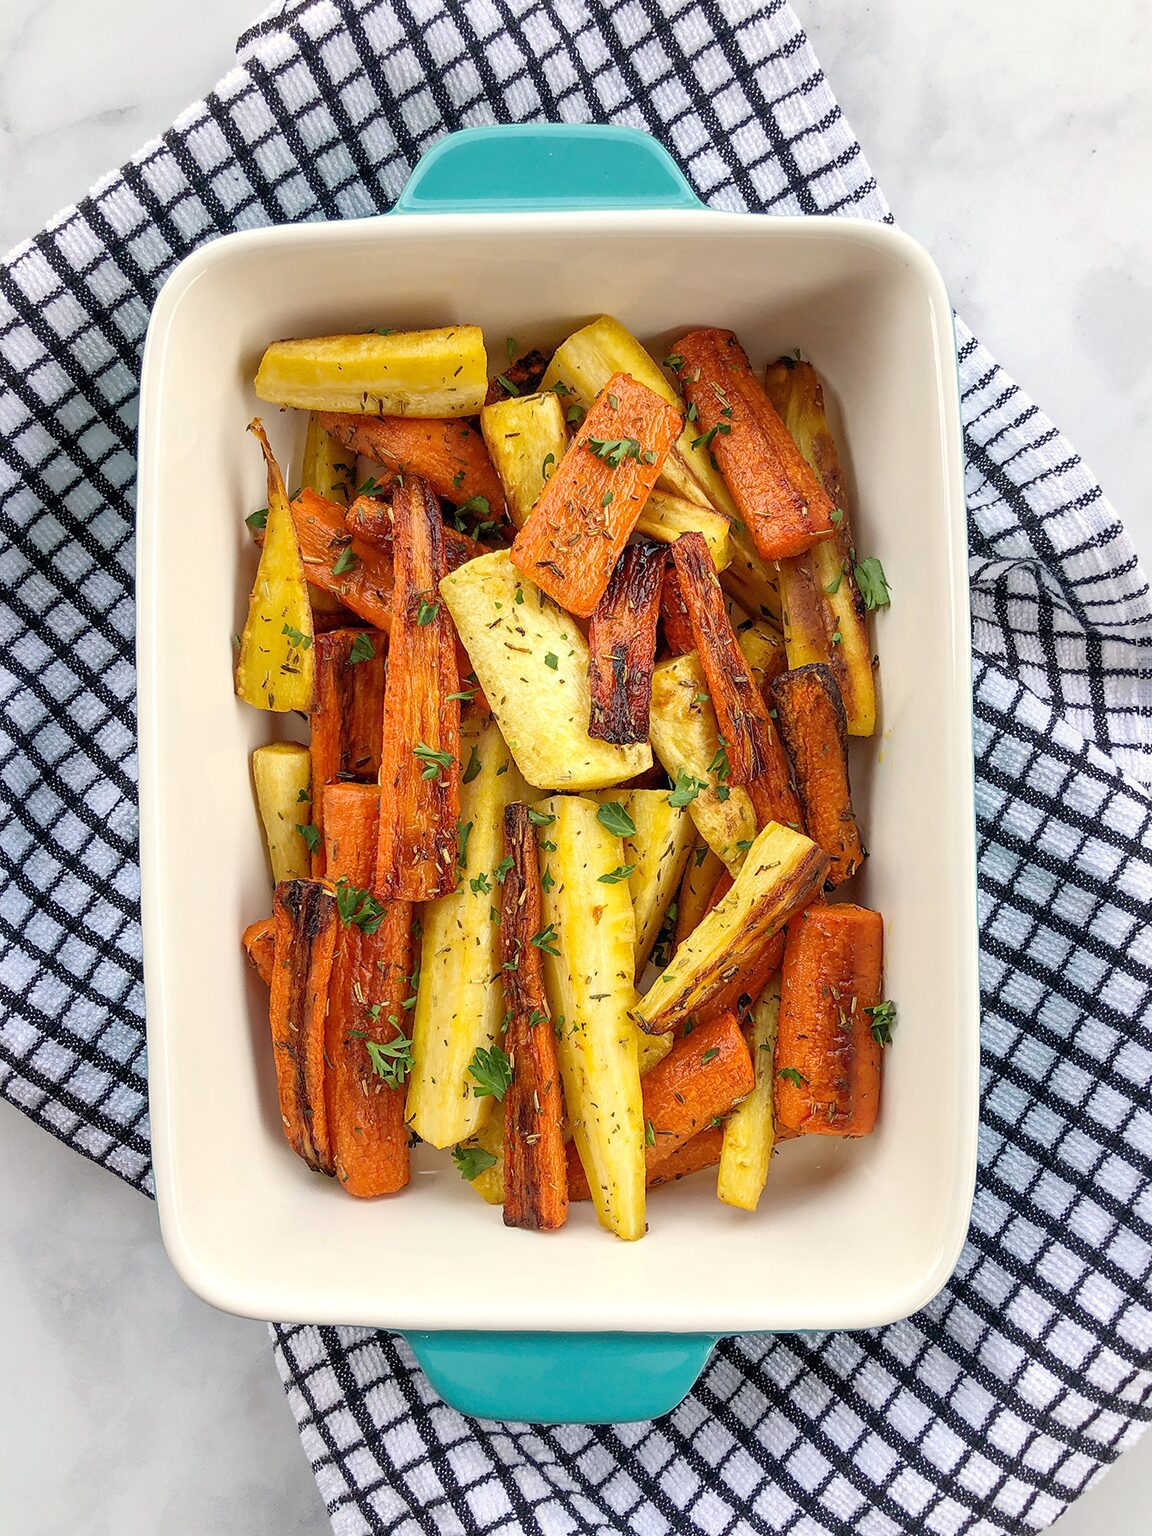 Roasted Root Vegetables in Baking Dish